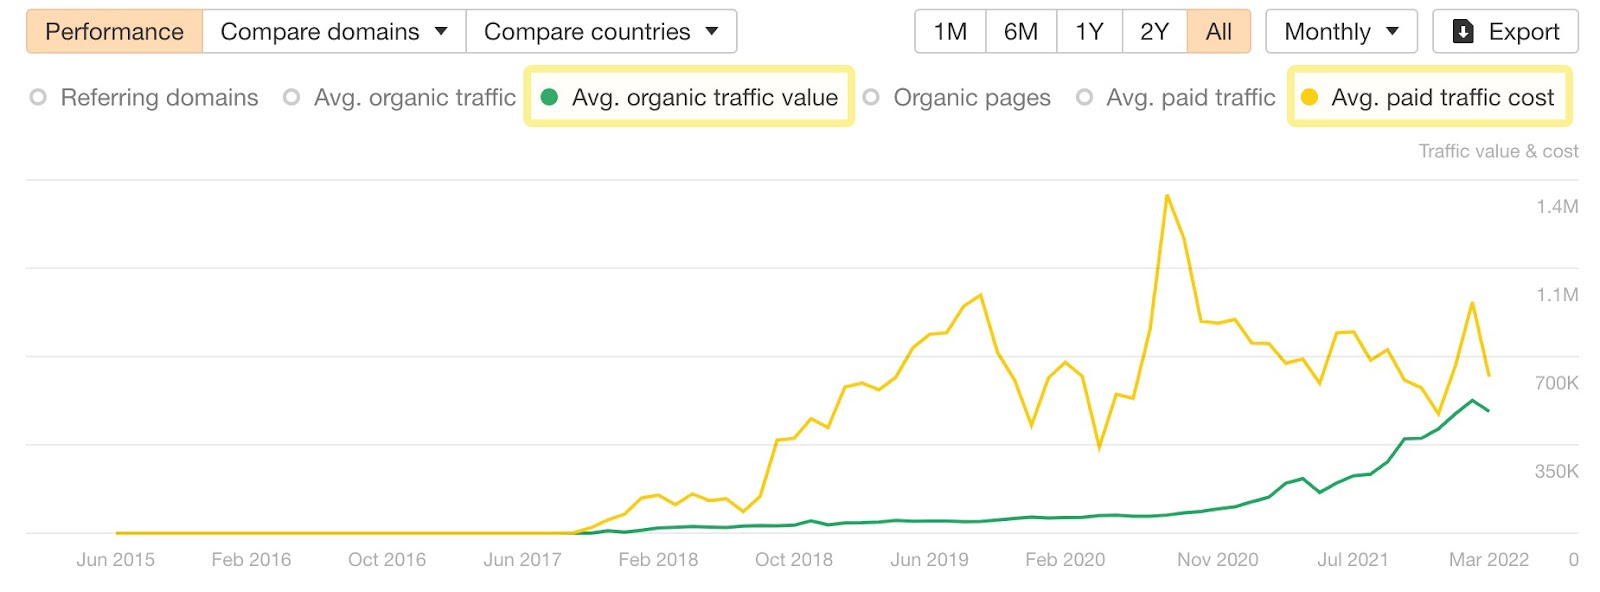 Toggle organic traffic value and paid traffic cost on and off in the history chart